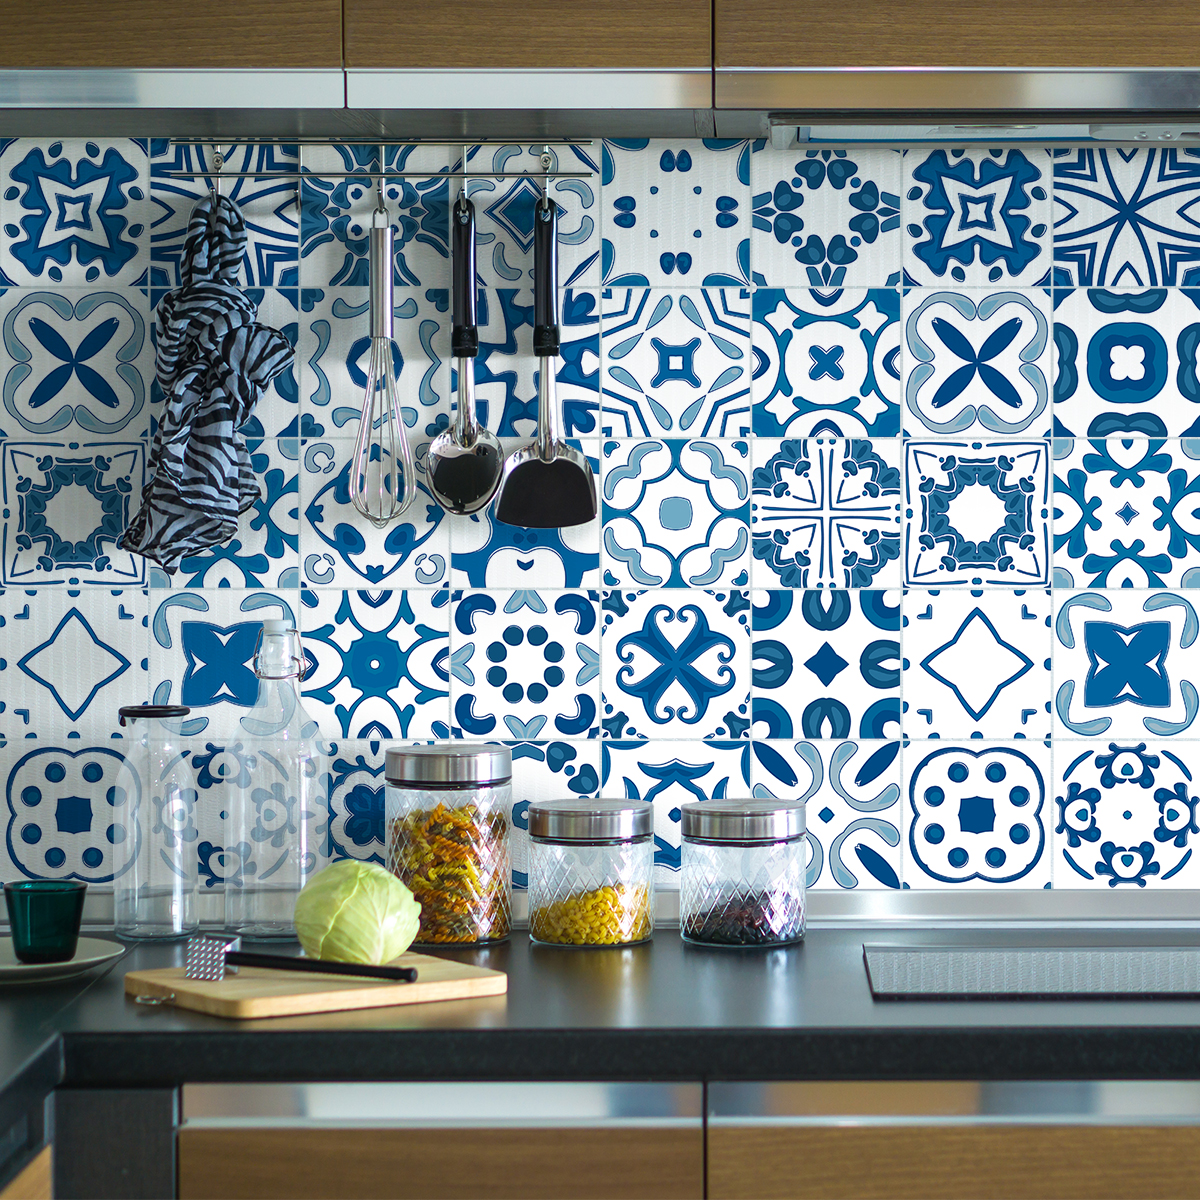 9 wall stickers cement tiles azulejos jevina